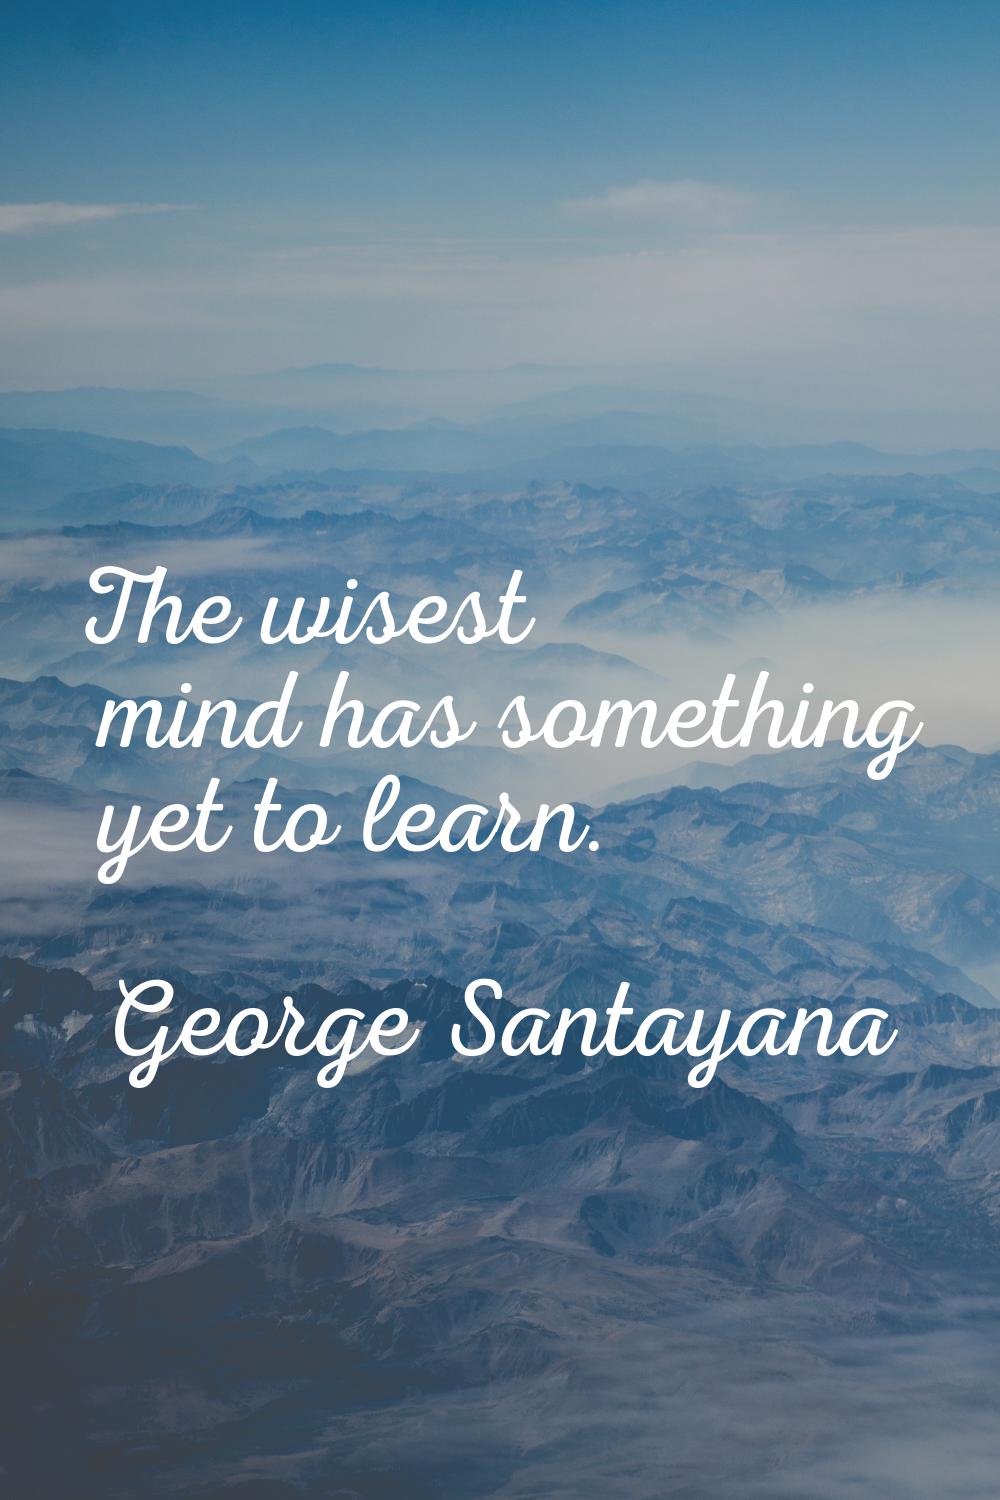 The wisest mind has something yet to learn.